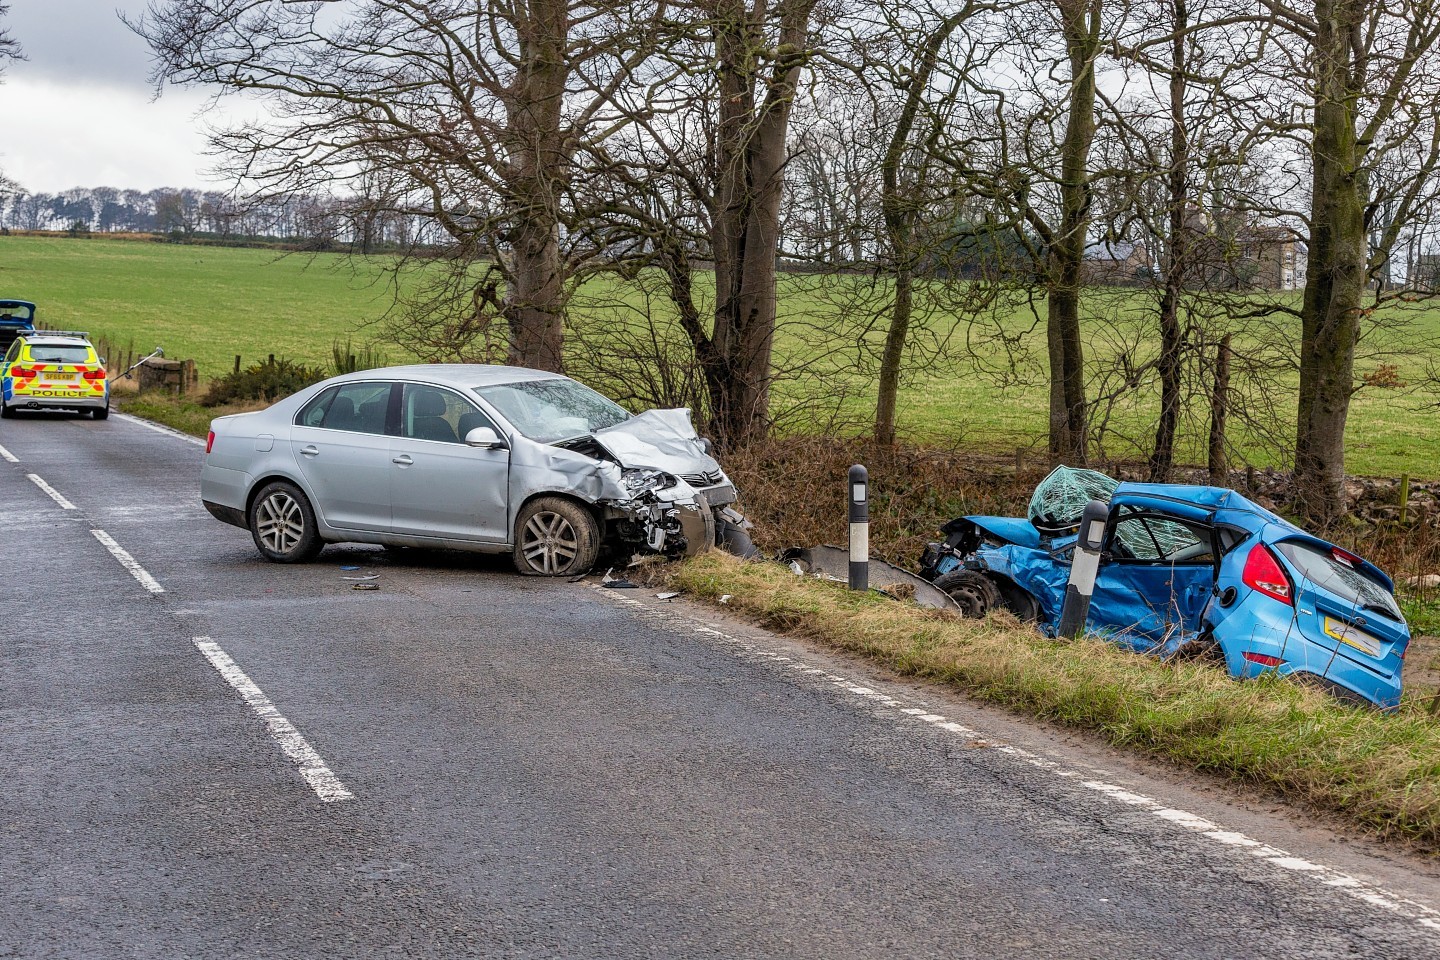 The scene of the crash on the B9170